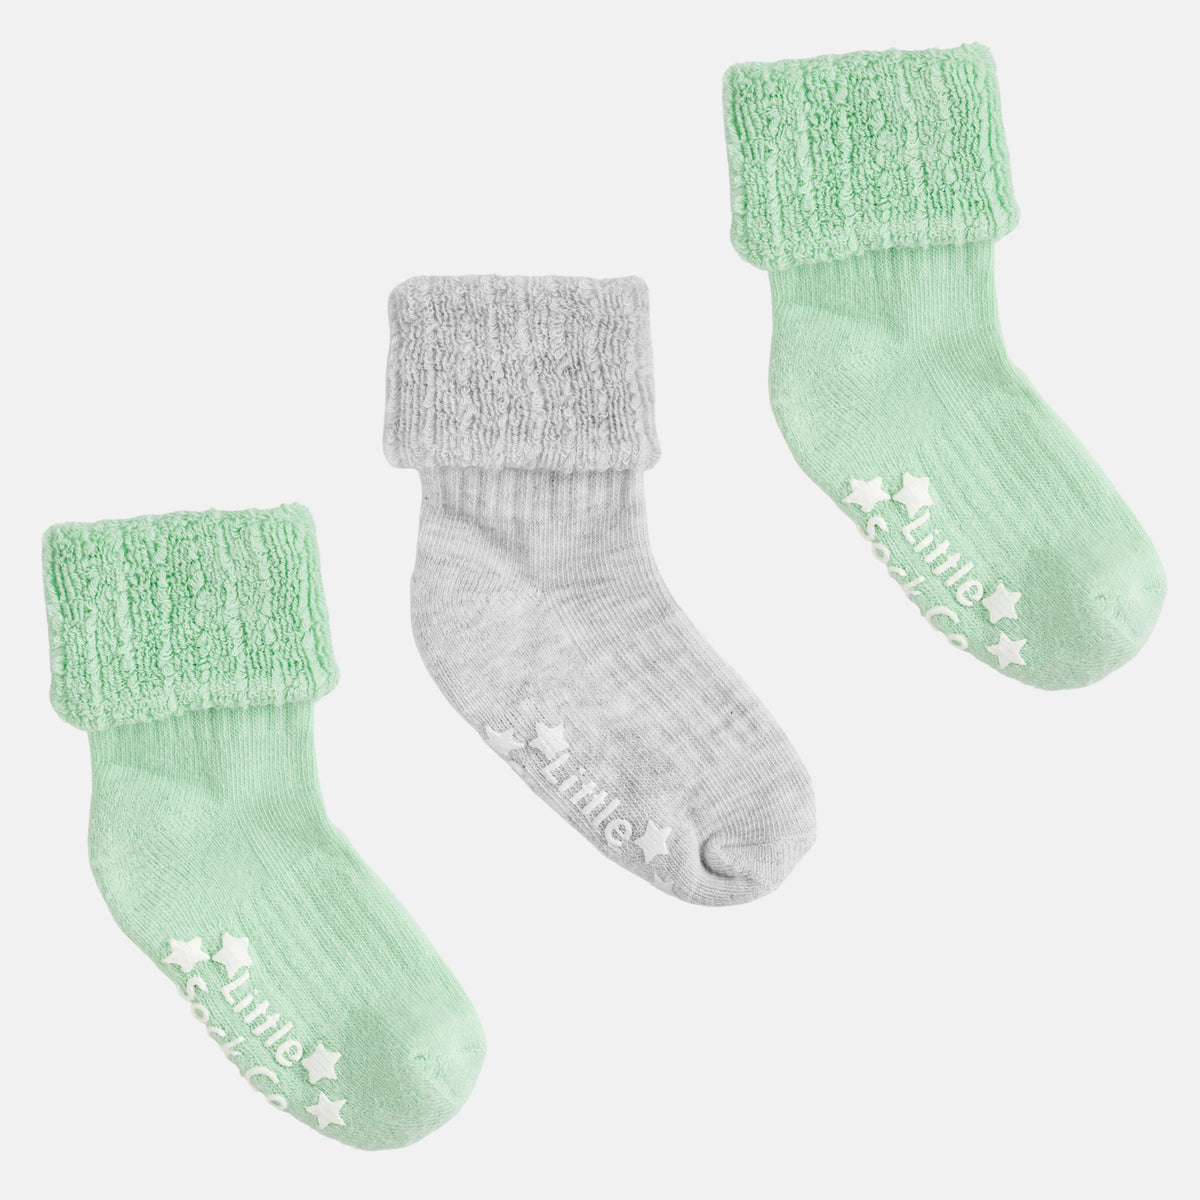 Cosy Stay on Winter Warm Non Slip Baby Socks - 3 Pack in Matcha and Cloud Grey - 0-2 Years